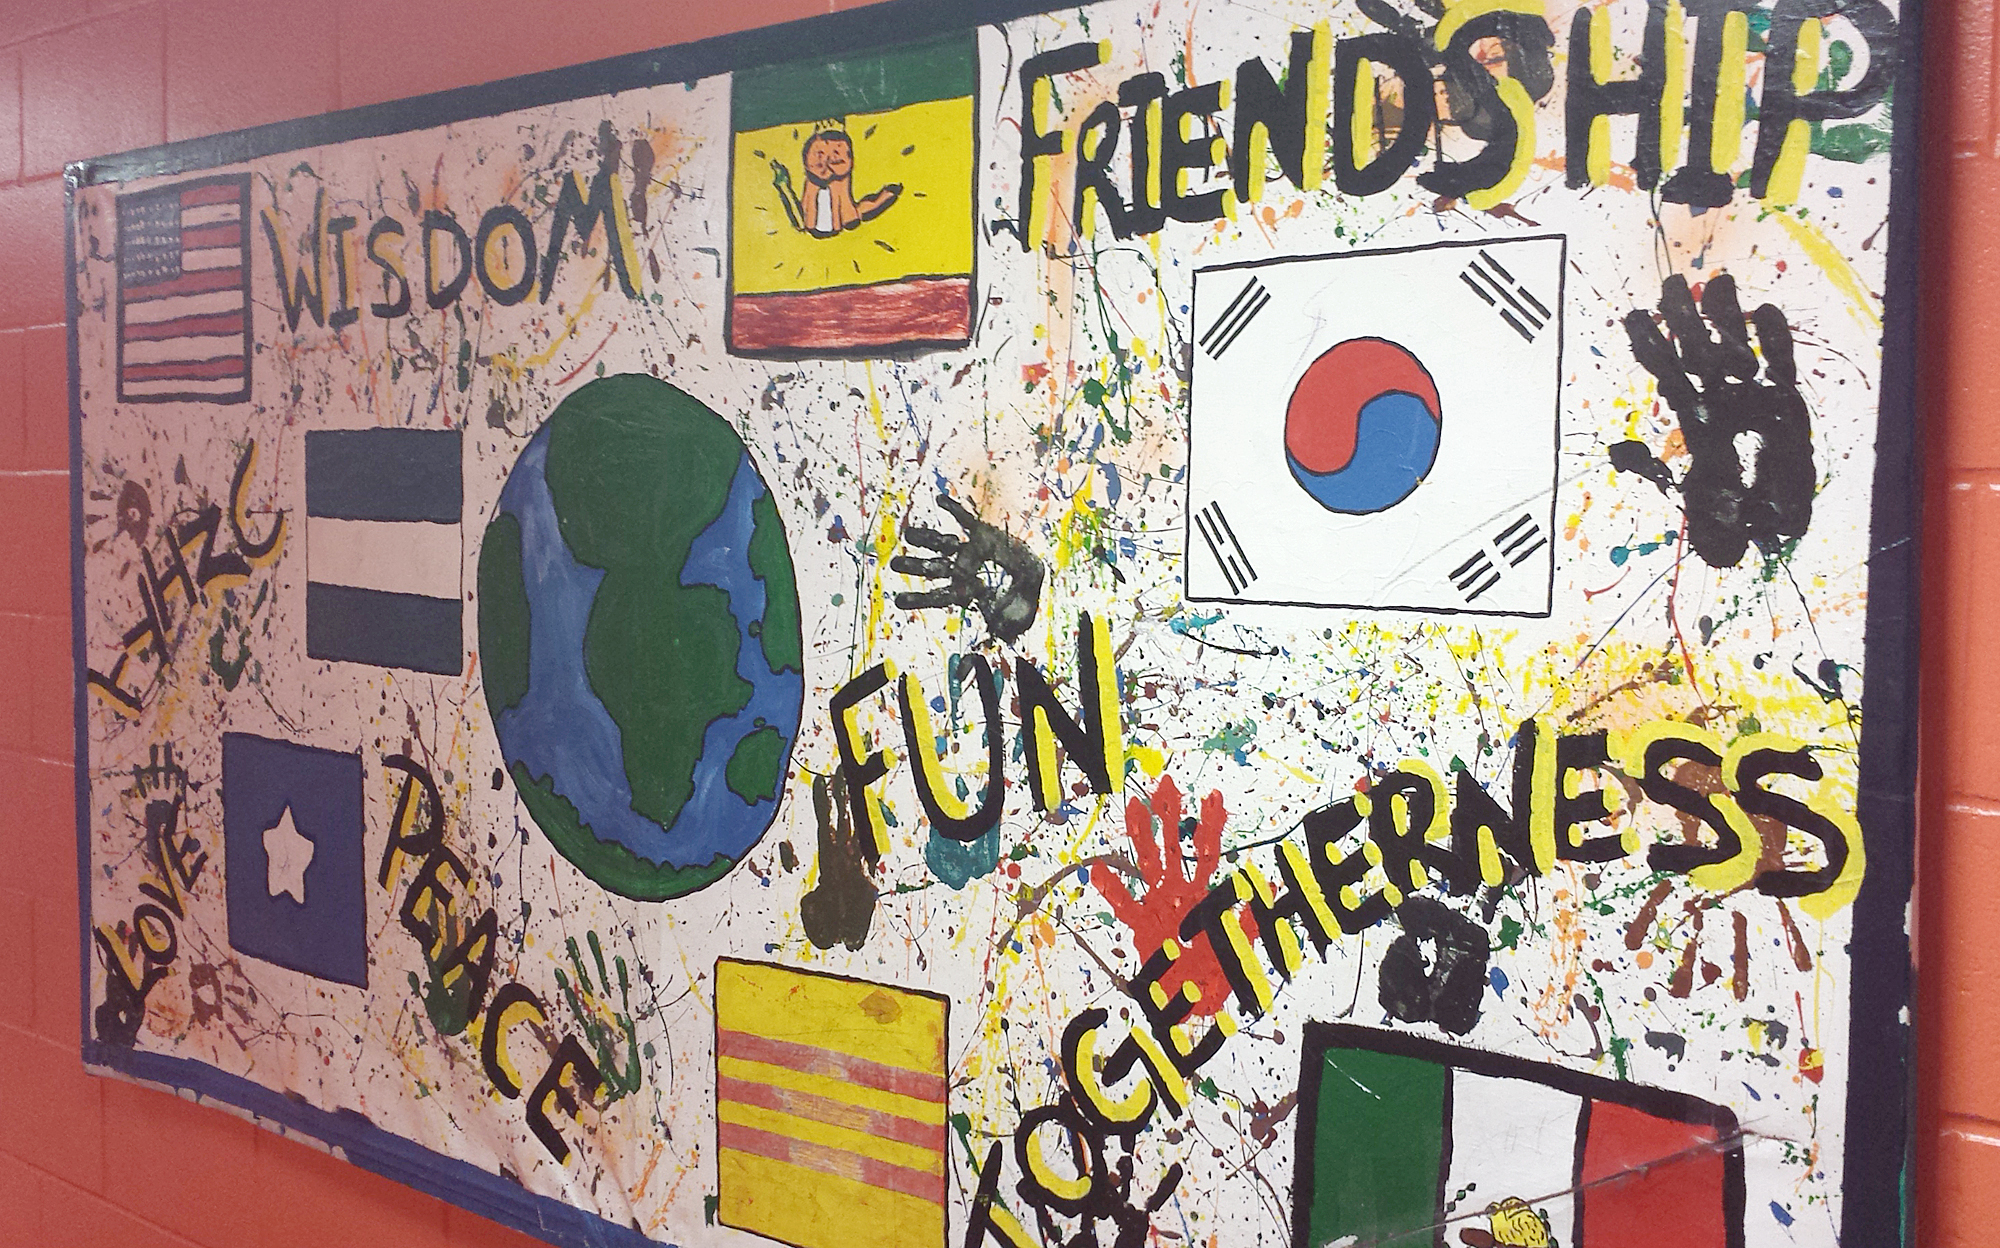 Painting hanging on a red wall with the earth in the middle, flags or various countries, handprints, and the words, "wisdom", "friendship", togetherness", "fun", "peace", "love", and a word that cannot be made out.